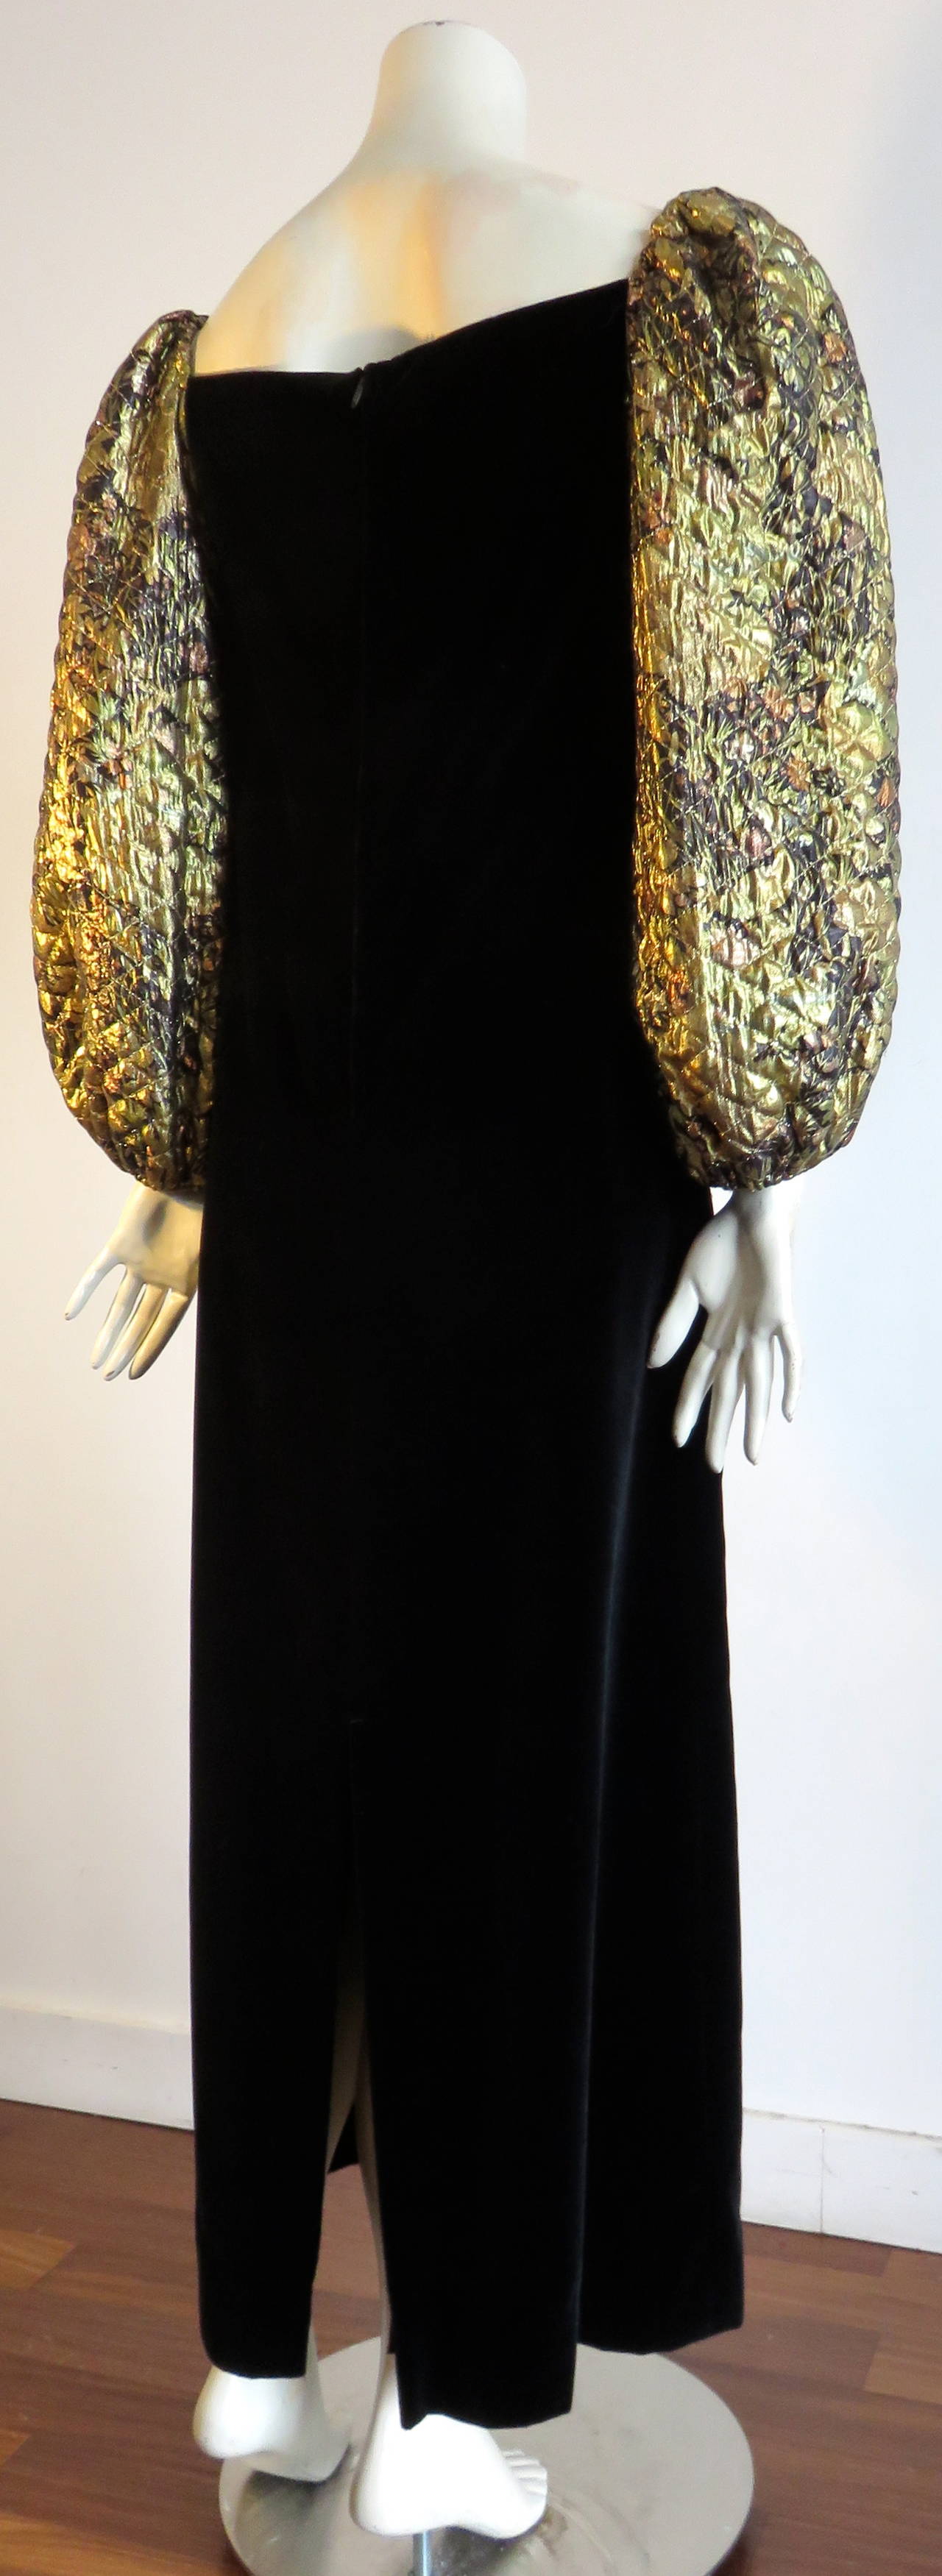 1980's PIERRE BALMAIN Volume sleeved evening gown dress For Sale 2